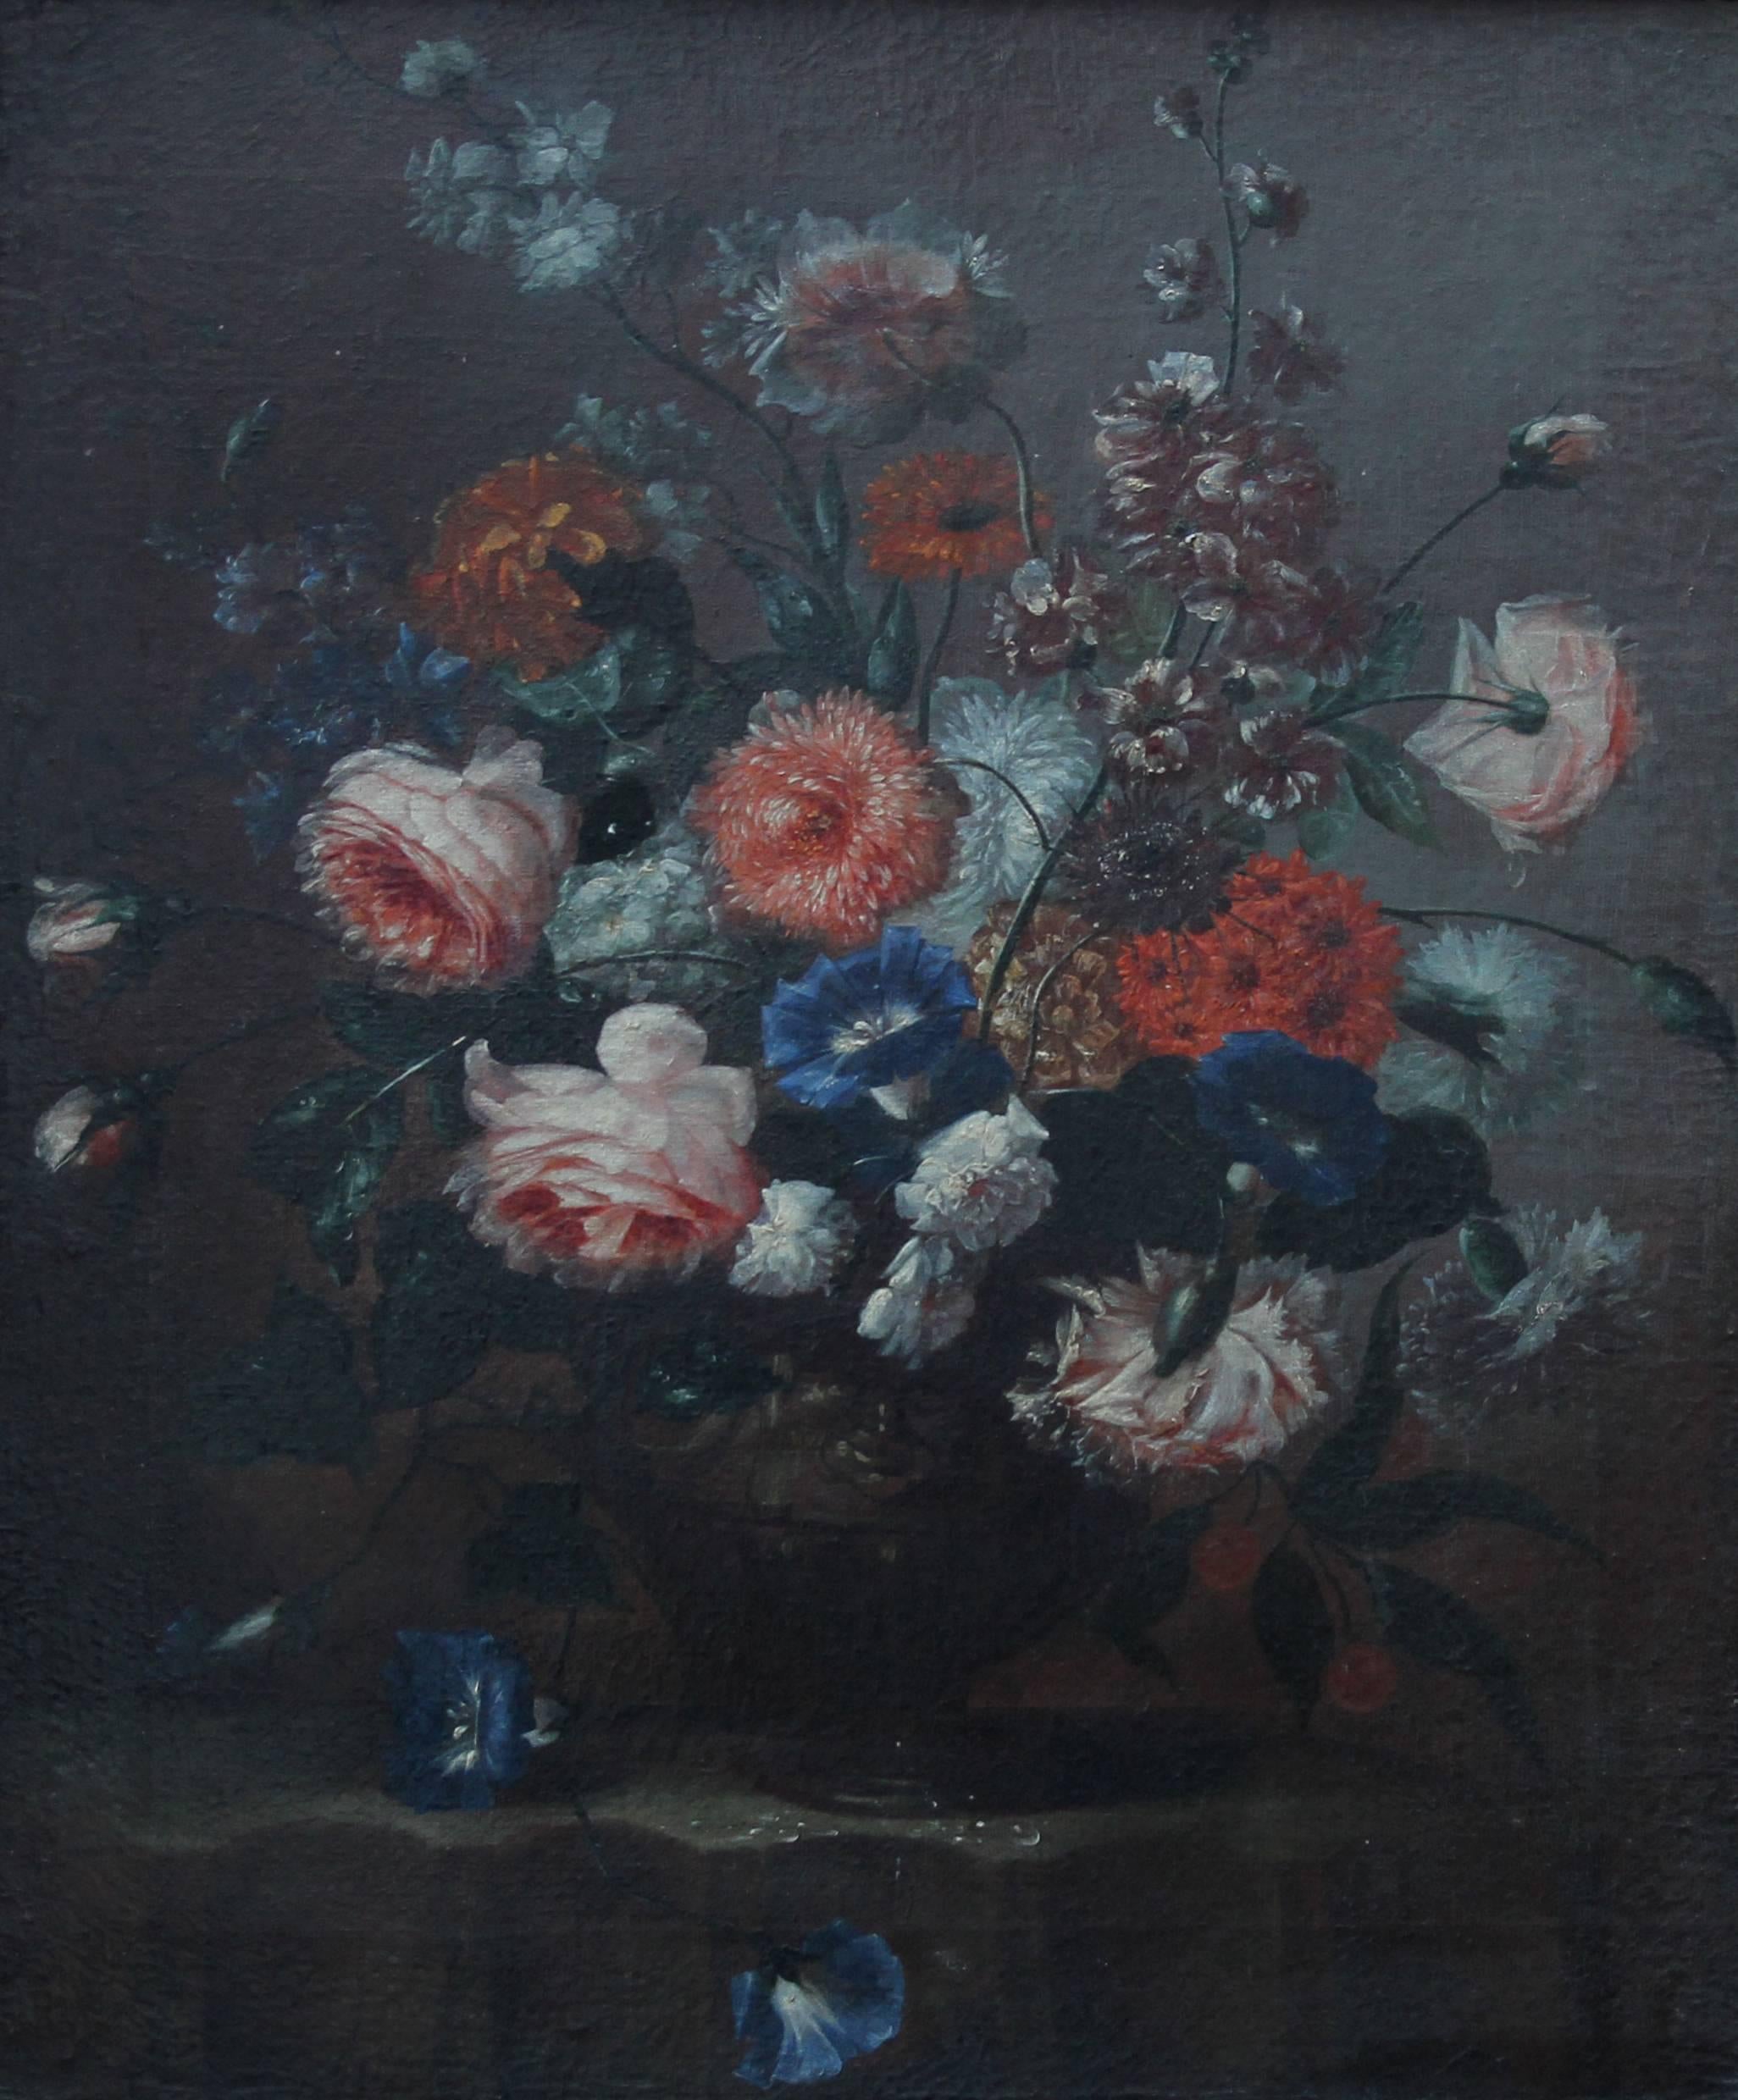 Floral Arrangement - Dutch Old Master art oil painting flowers rose rococo frame - Painting by Unknown